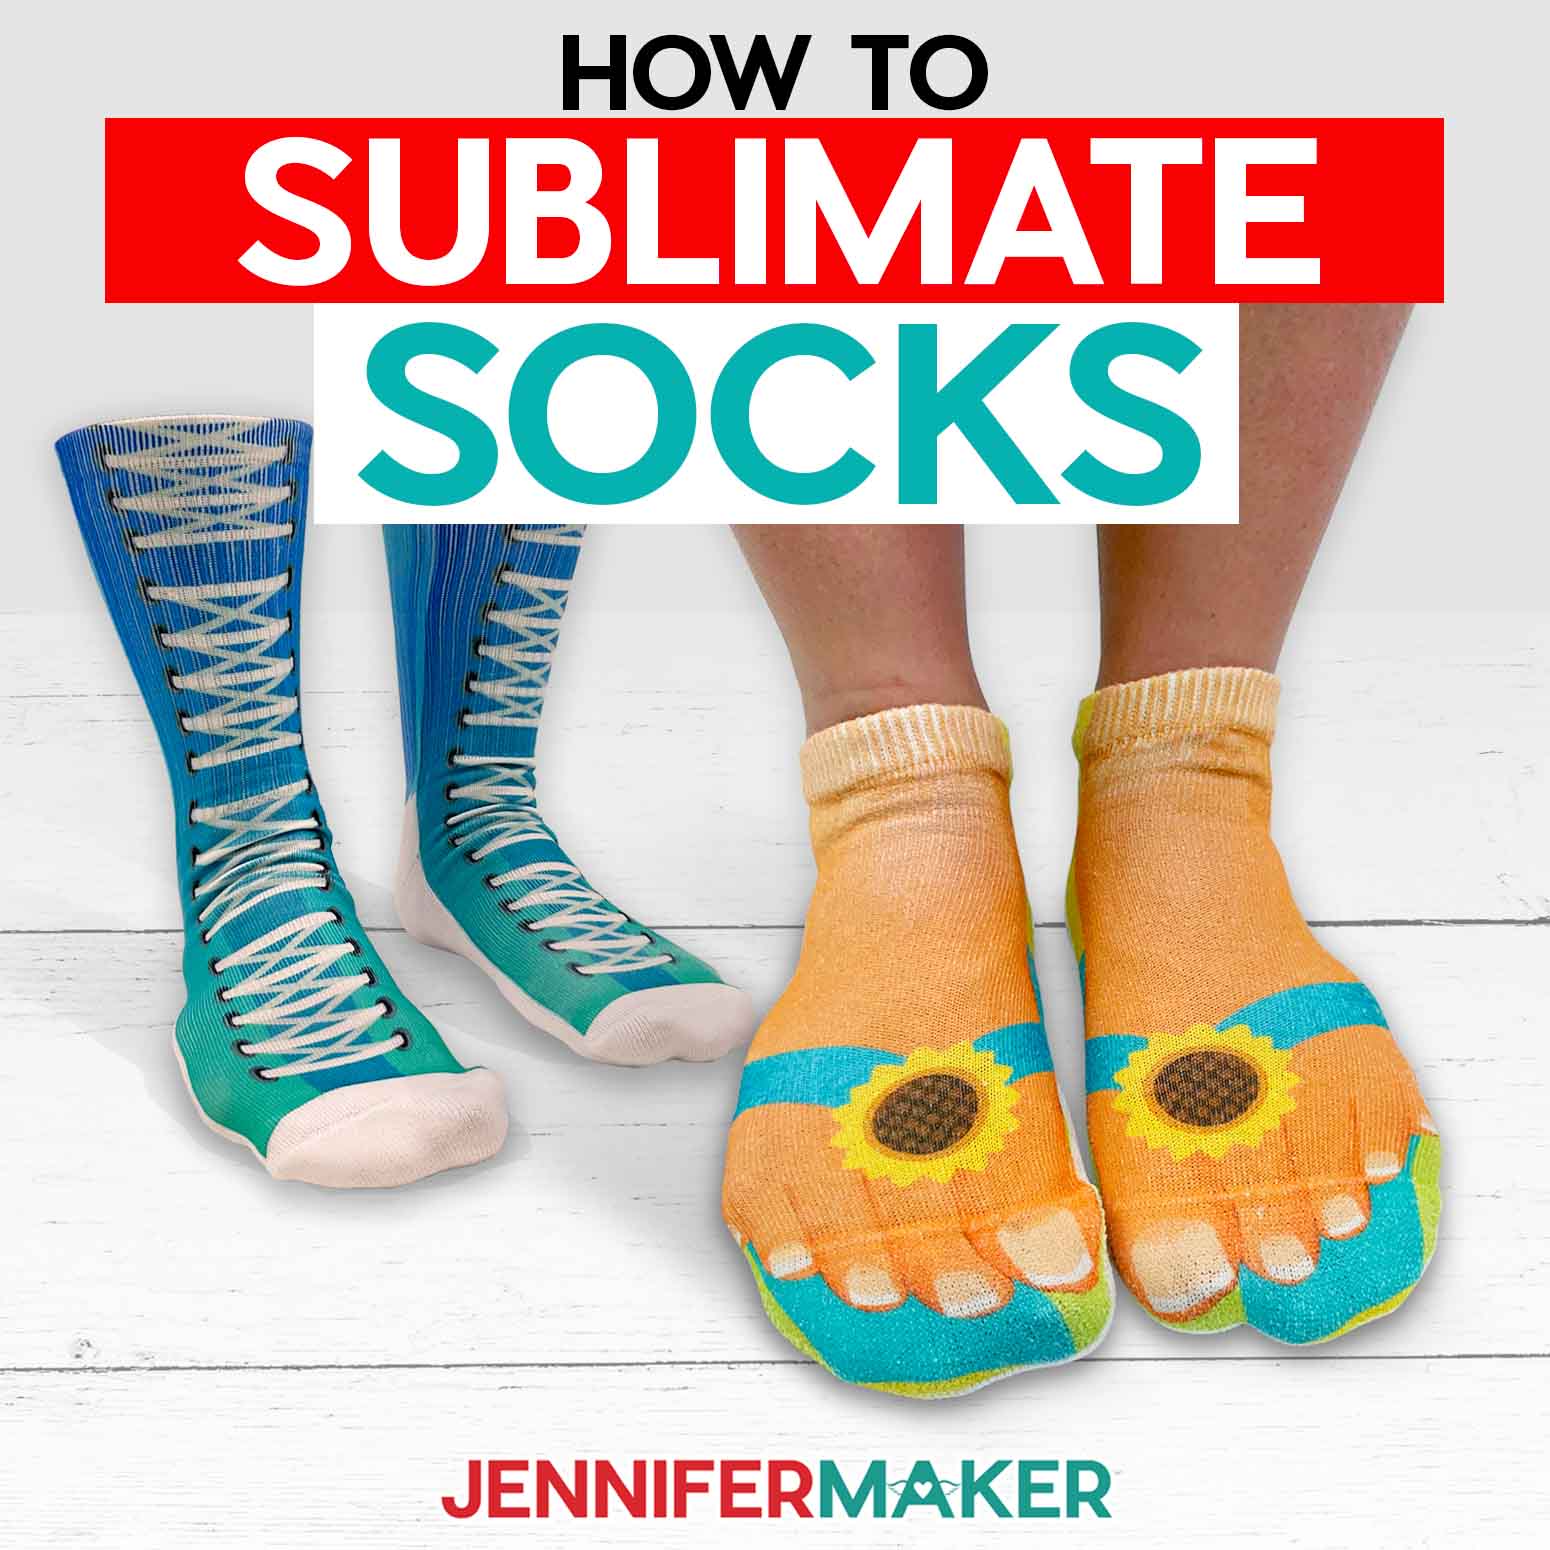 Sublimation socks in high top and flip flop designs.